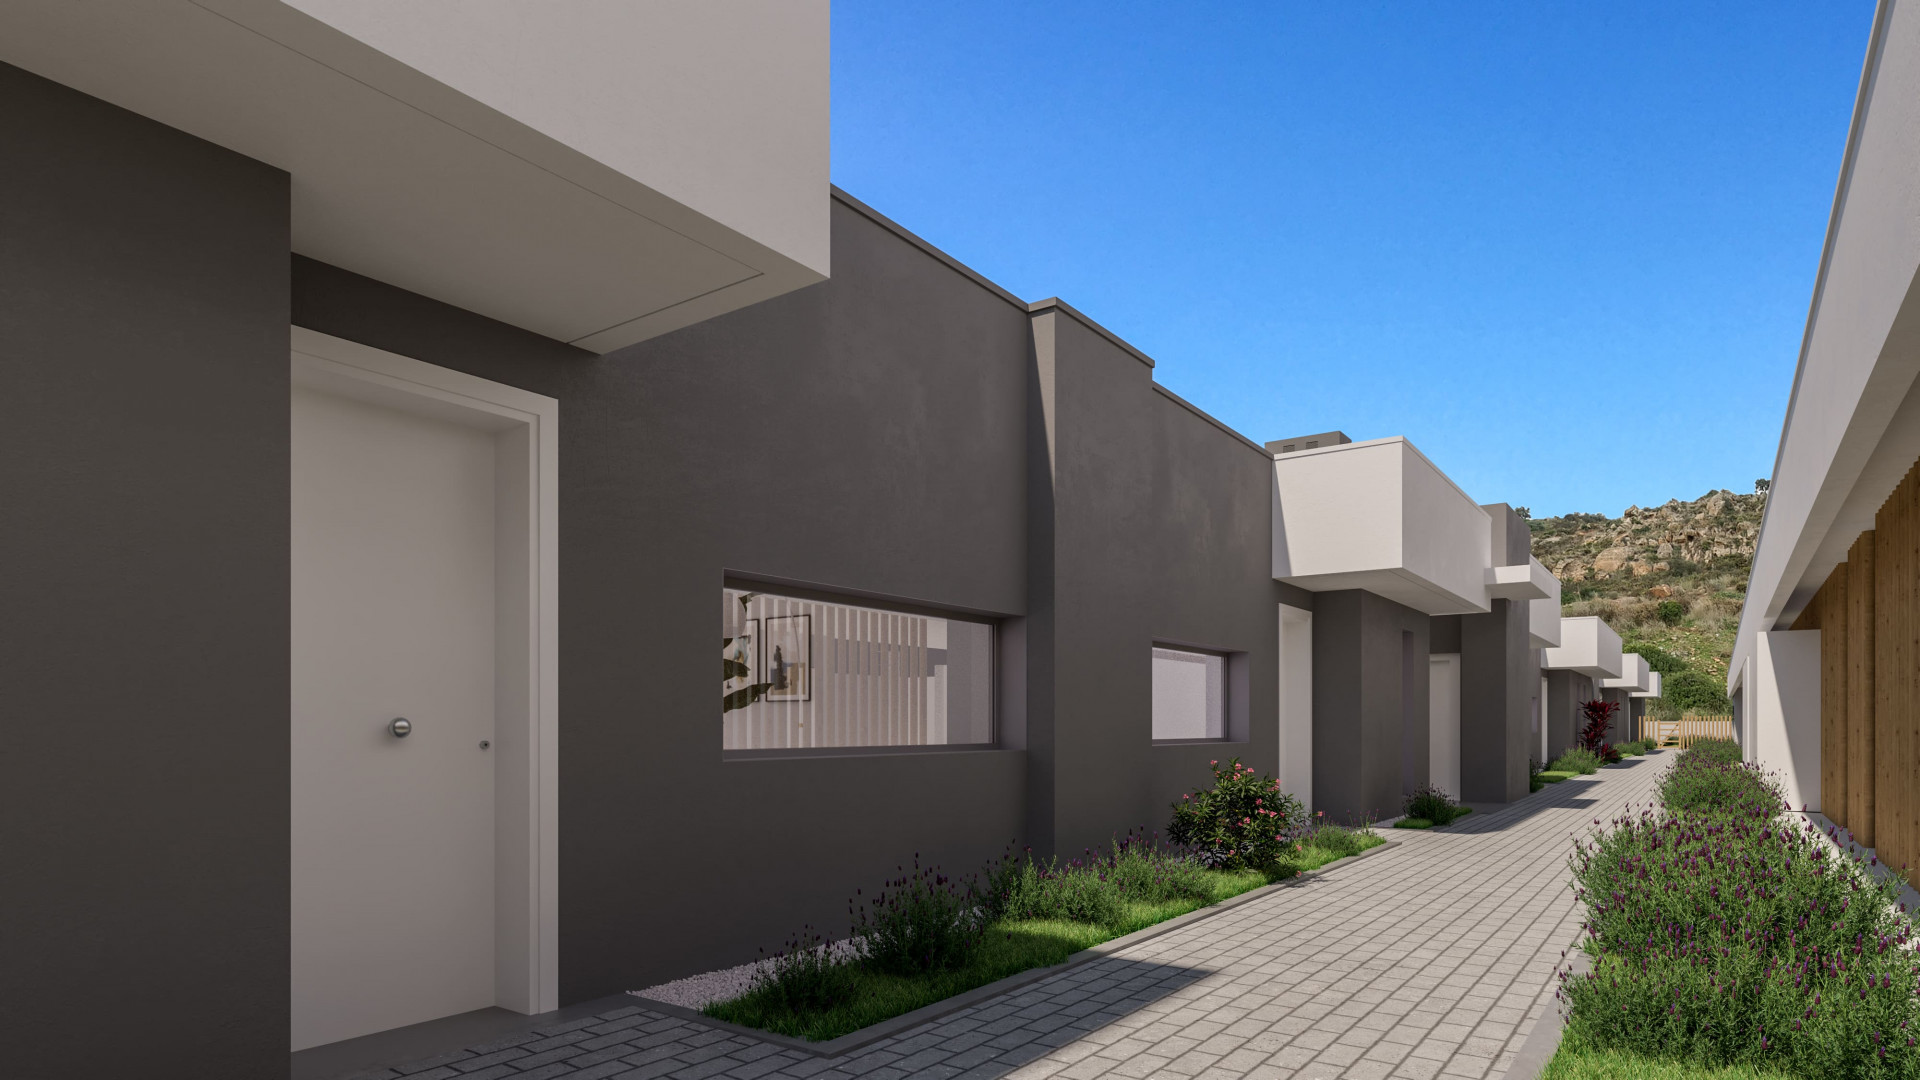 Blue Marine: Residential project in Manilva of semi-detached and detached houses with 3 and 4 bedrooms. | Image 9